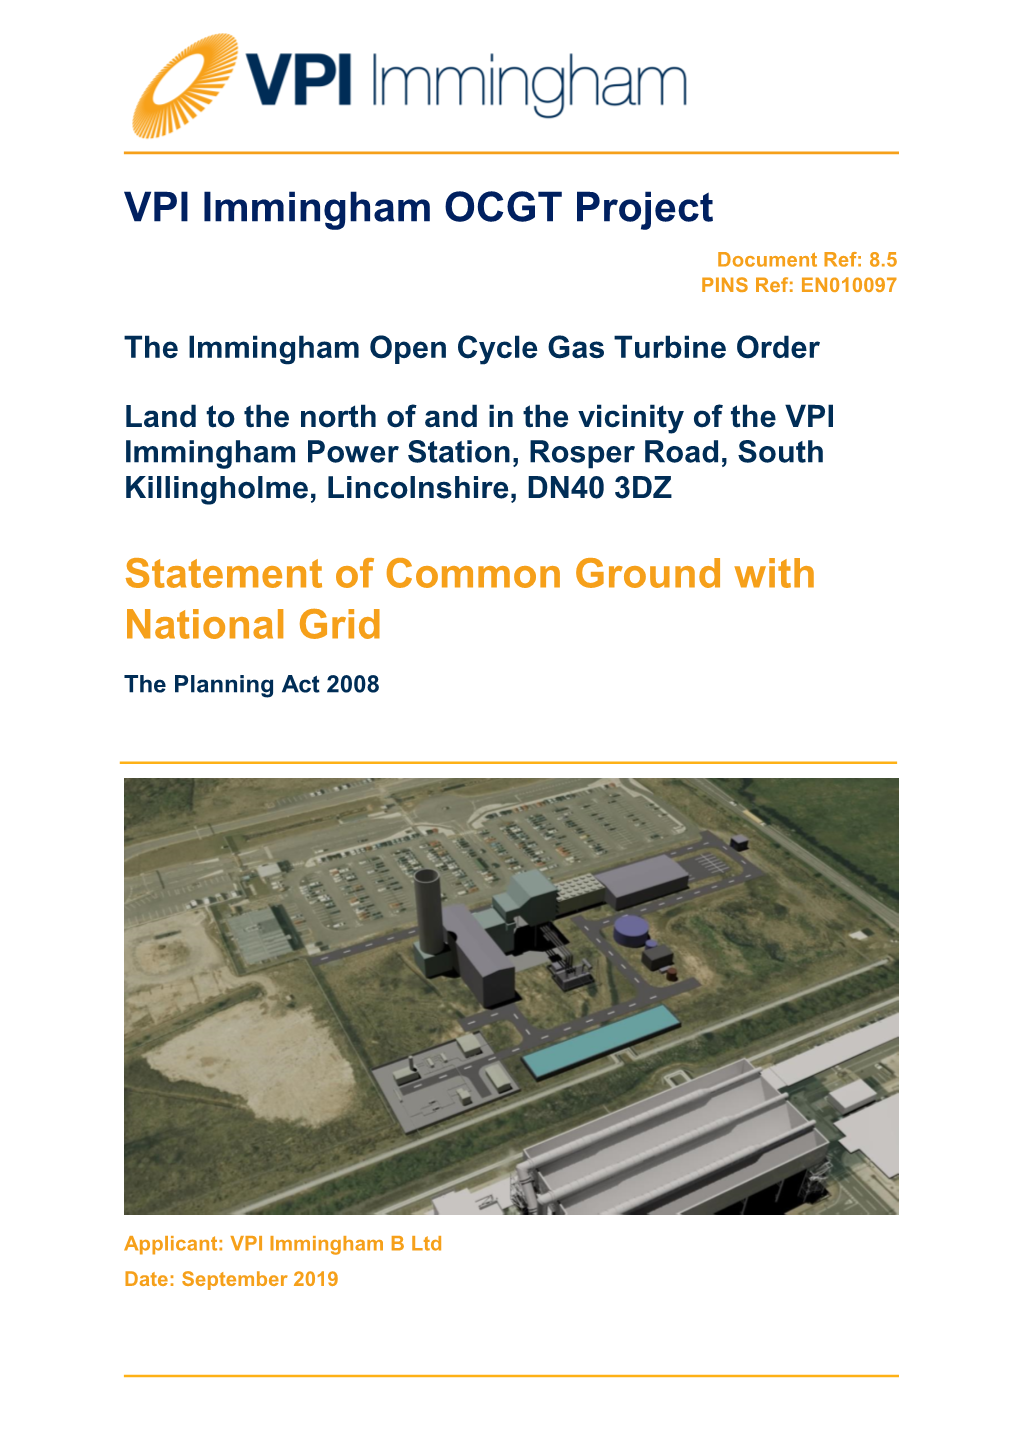 VPI Immingham OCGT Project Statement of Common Ground with National Grid